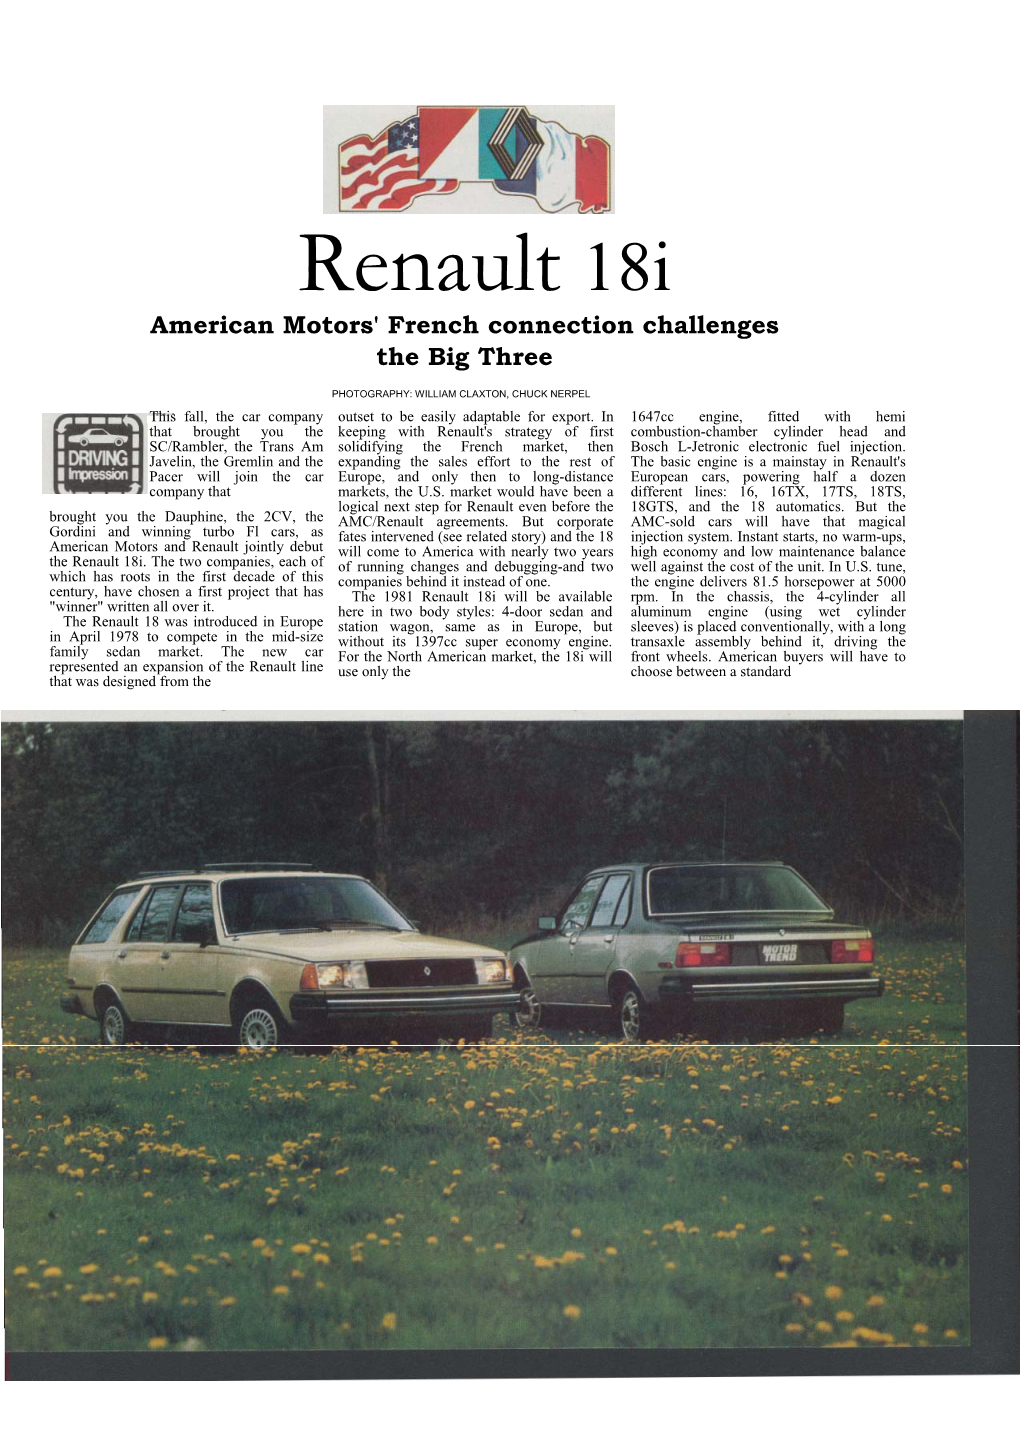 Renault 18I American Motors' French Connection Challenges the Big Three